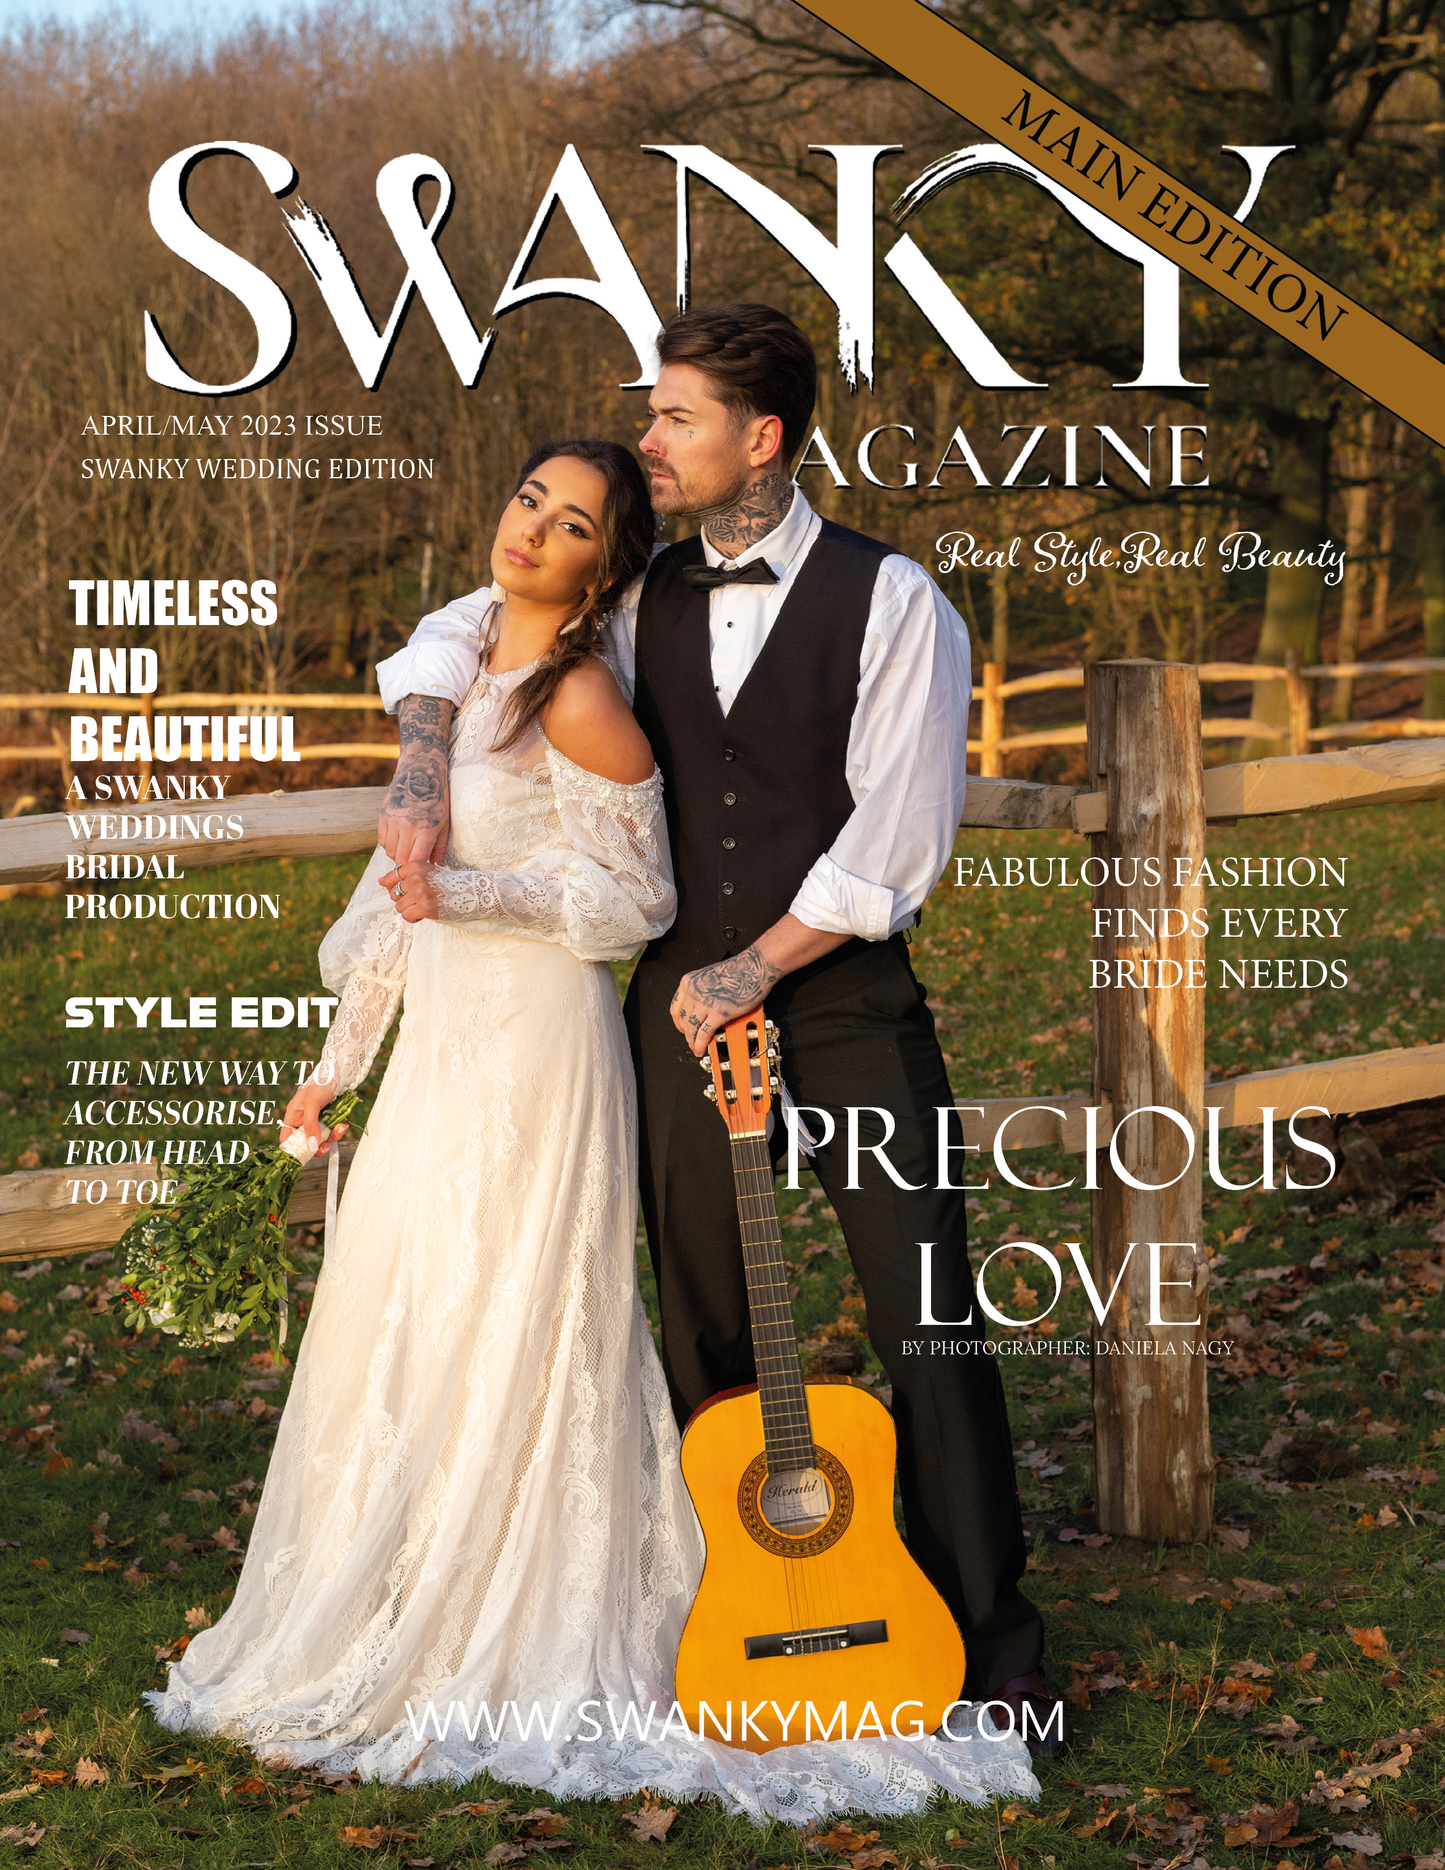 Swanky Wedding Edition April/May 2023 Issue 02: The Main Issue